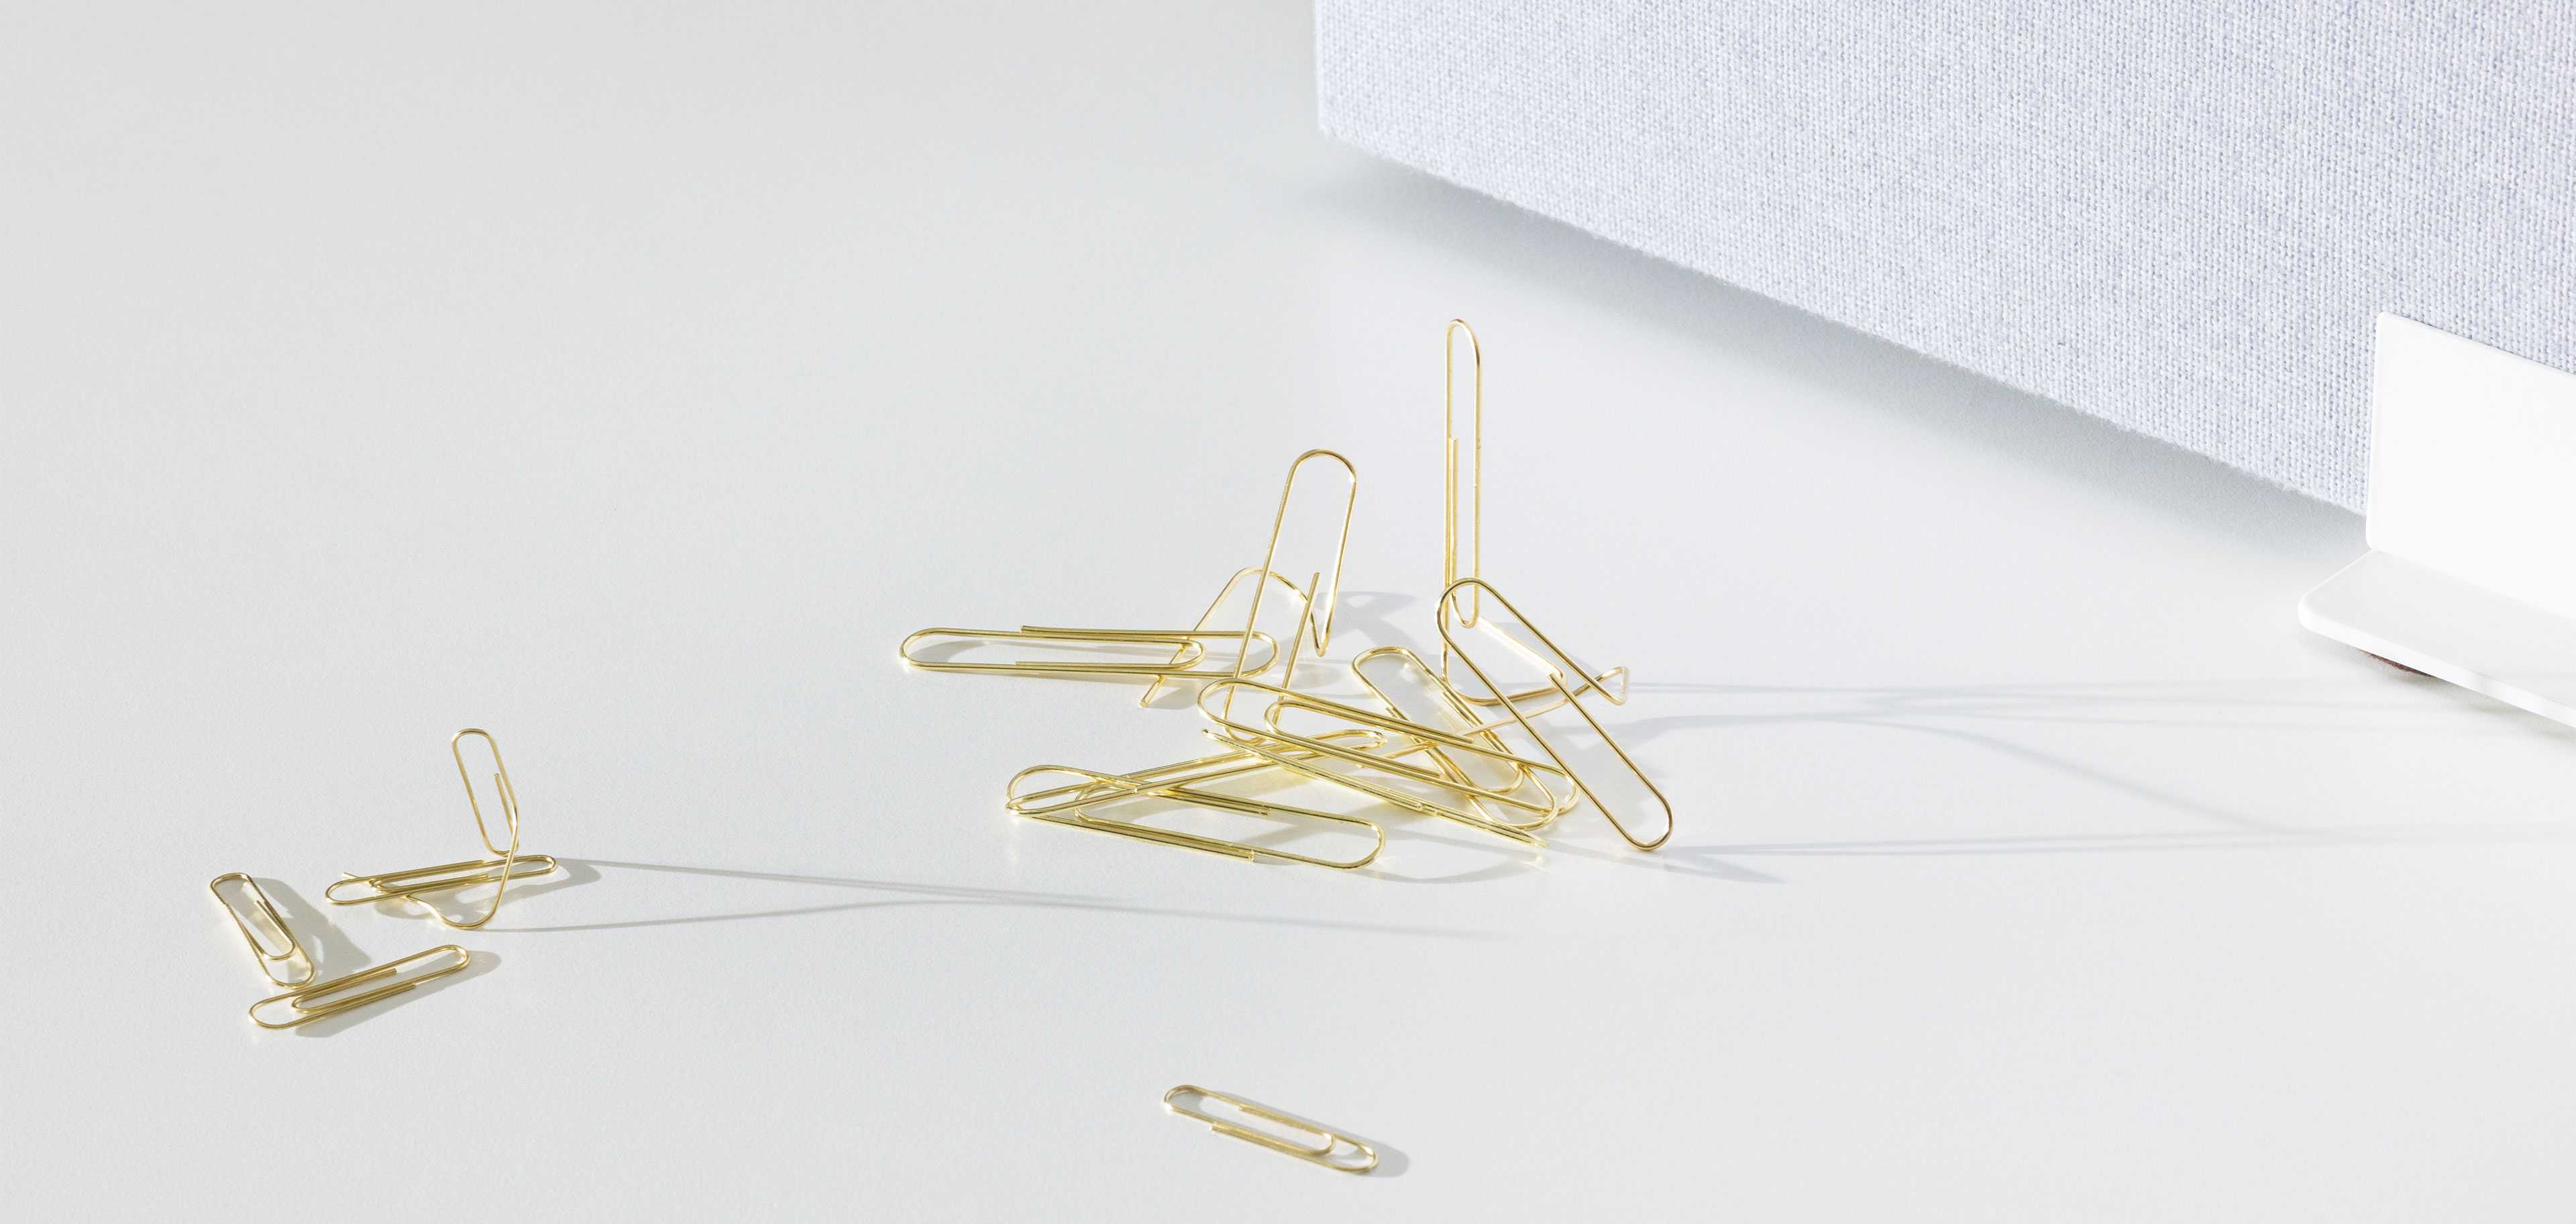 Paperclips and a table screen on a table